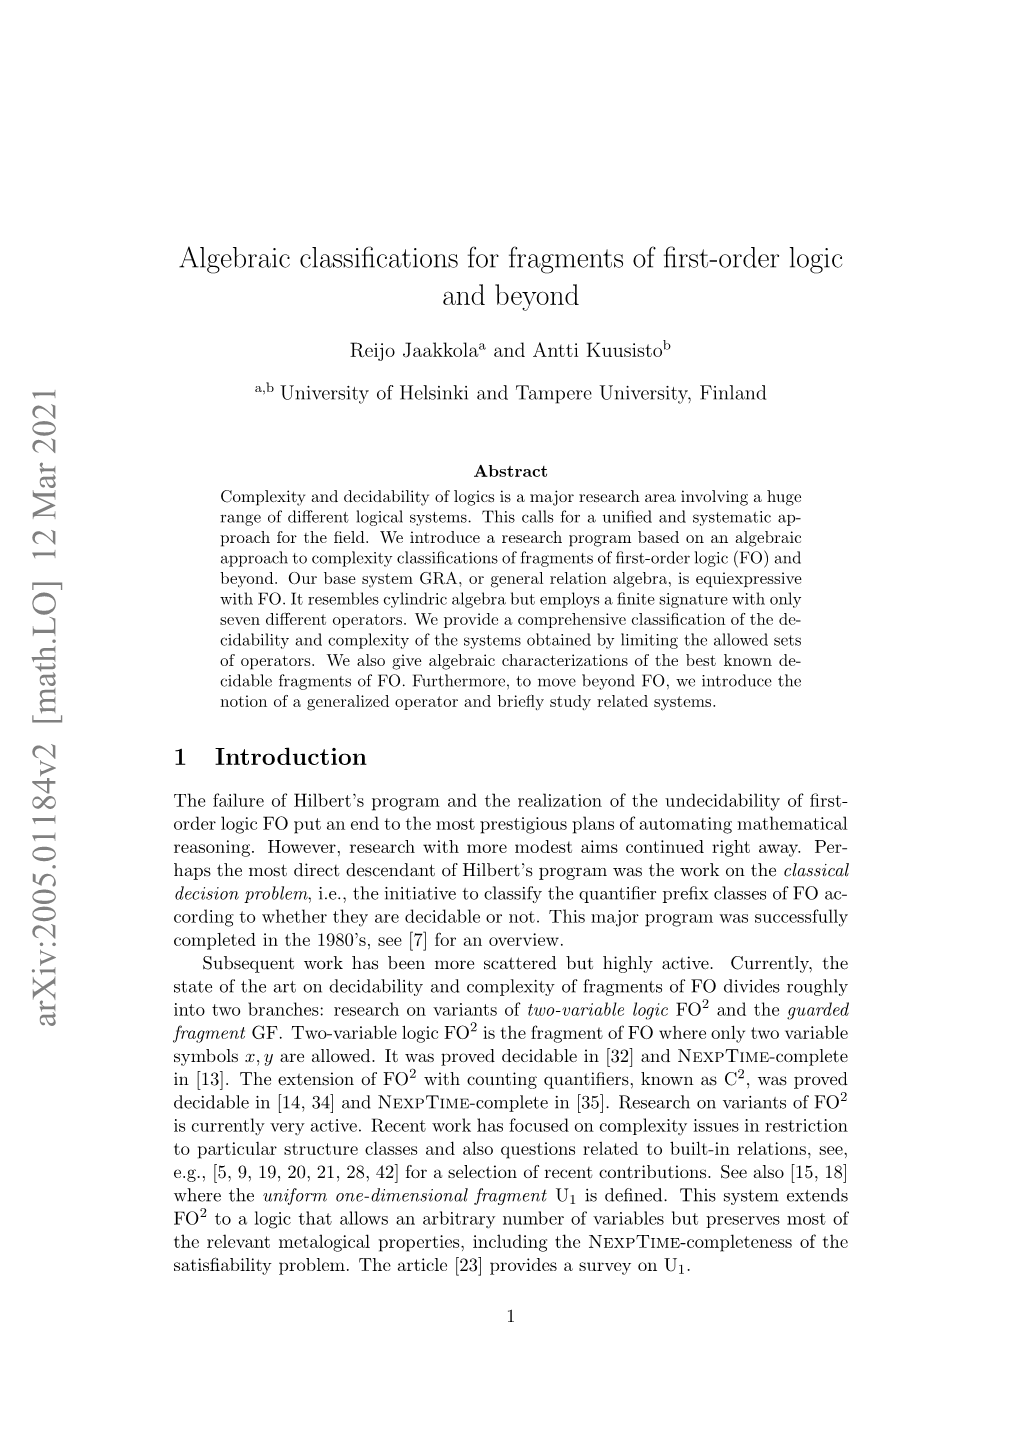 Algebraic Classifications for Fragments of First-Order Logic and Beyond